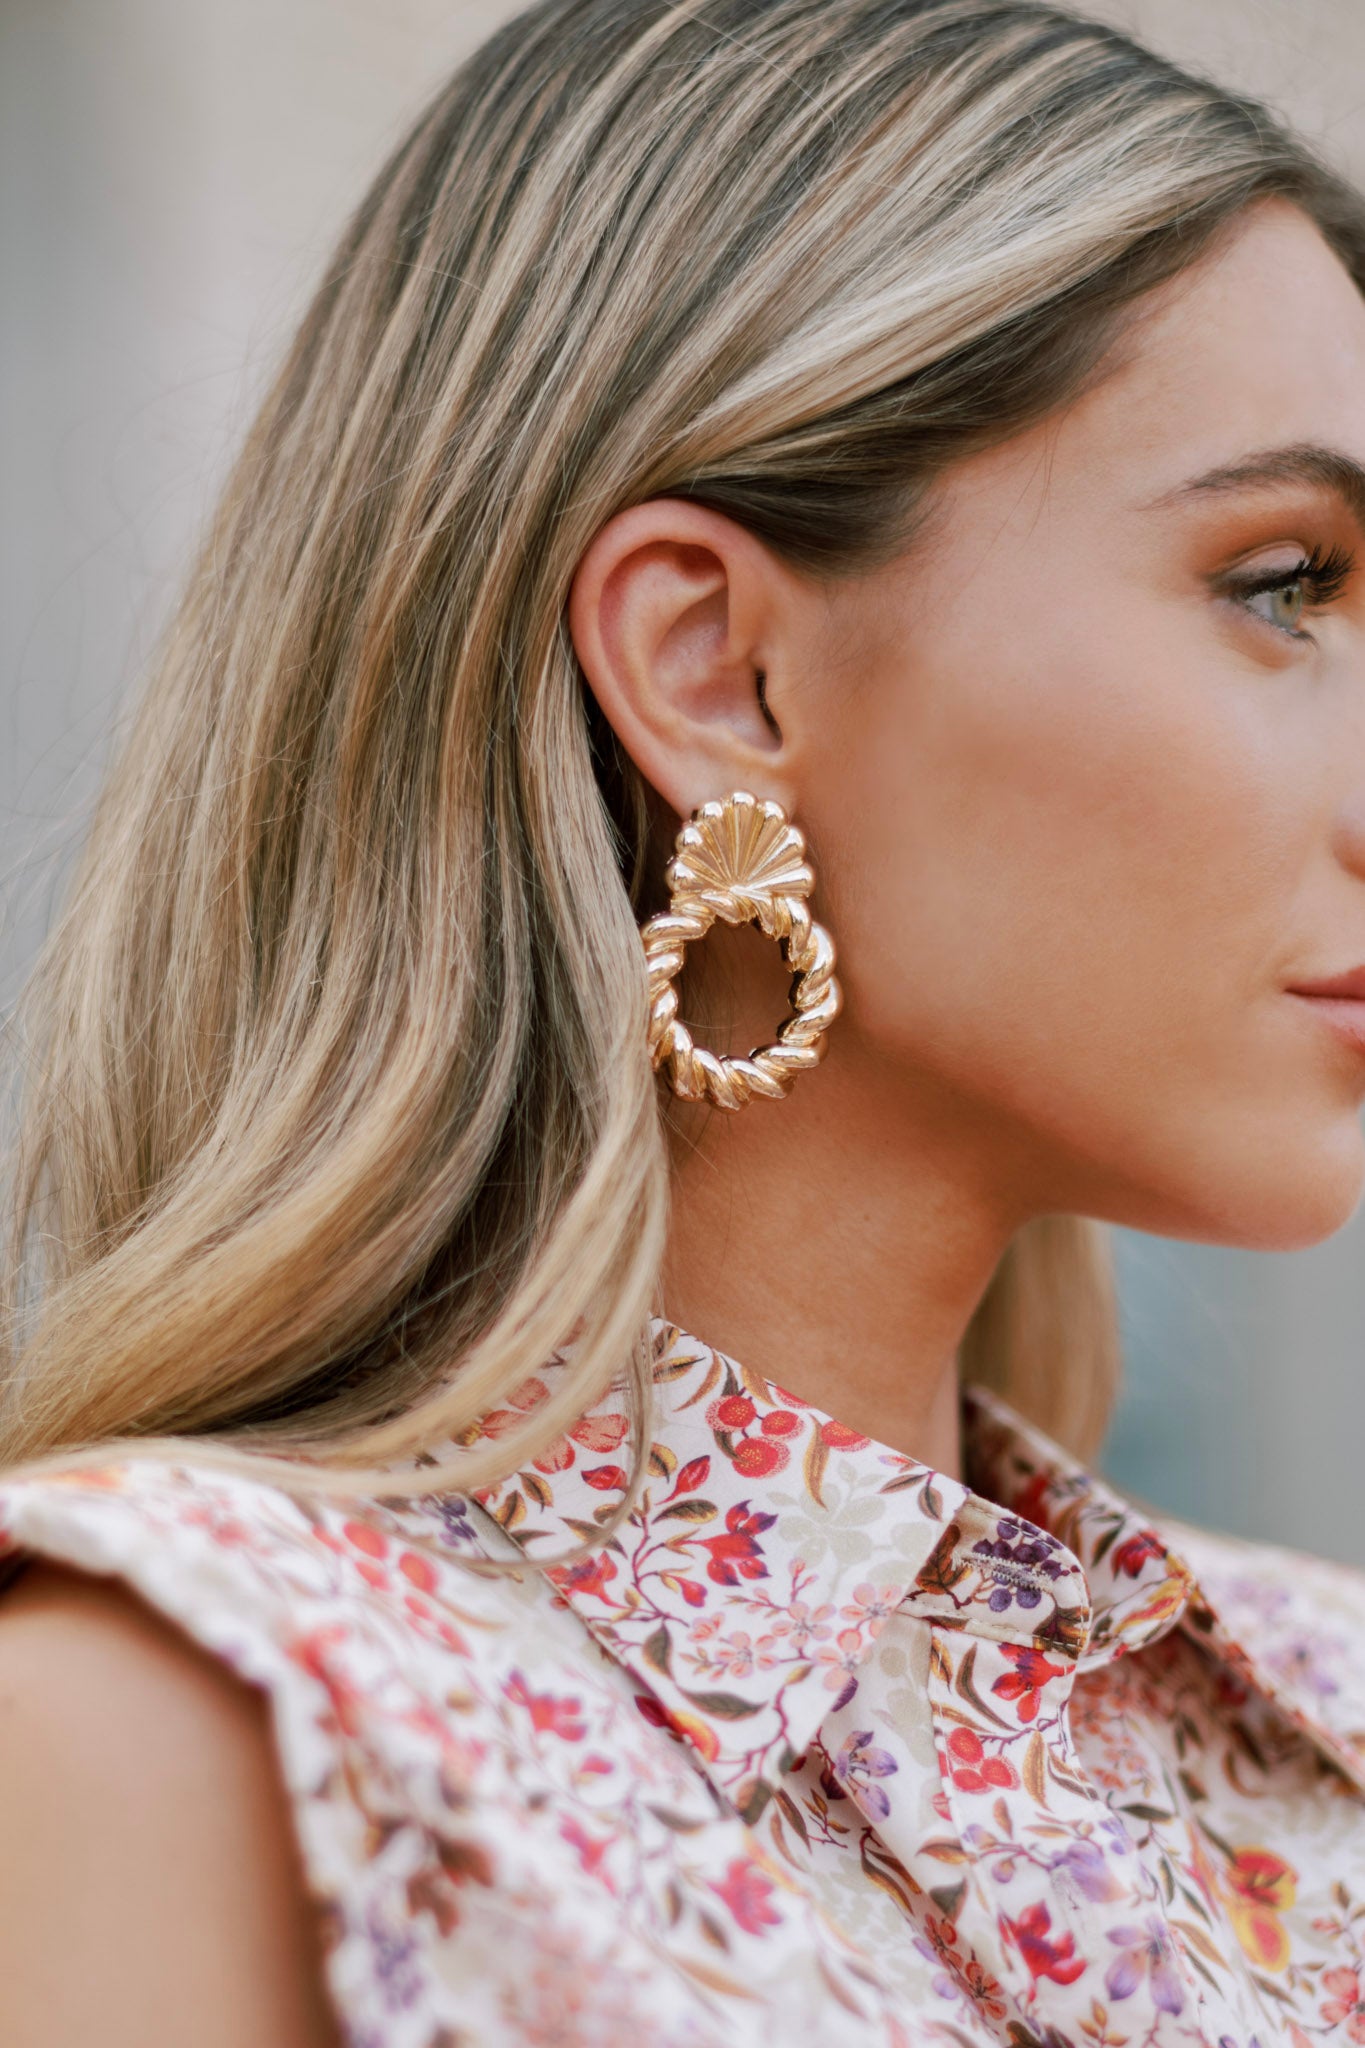 These gold earrings feature a twisted rope-like design forming an open loop, with the top part resembling a seashell, and secure post backings.